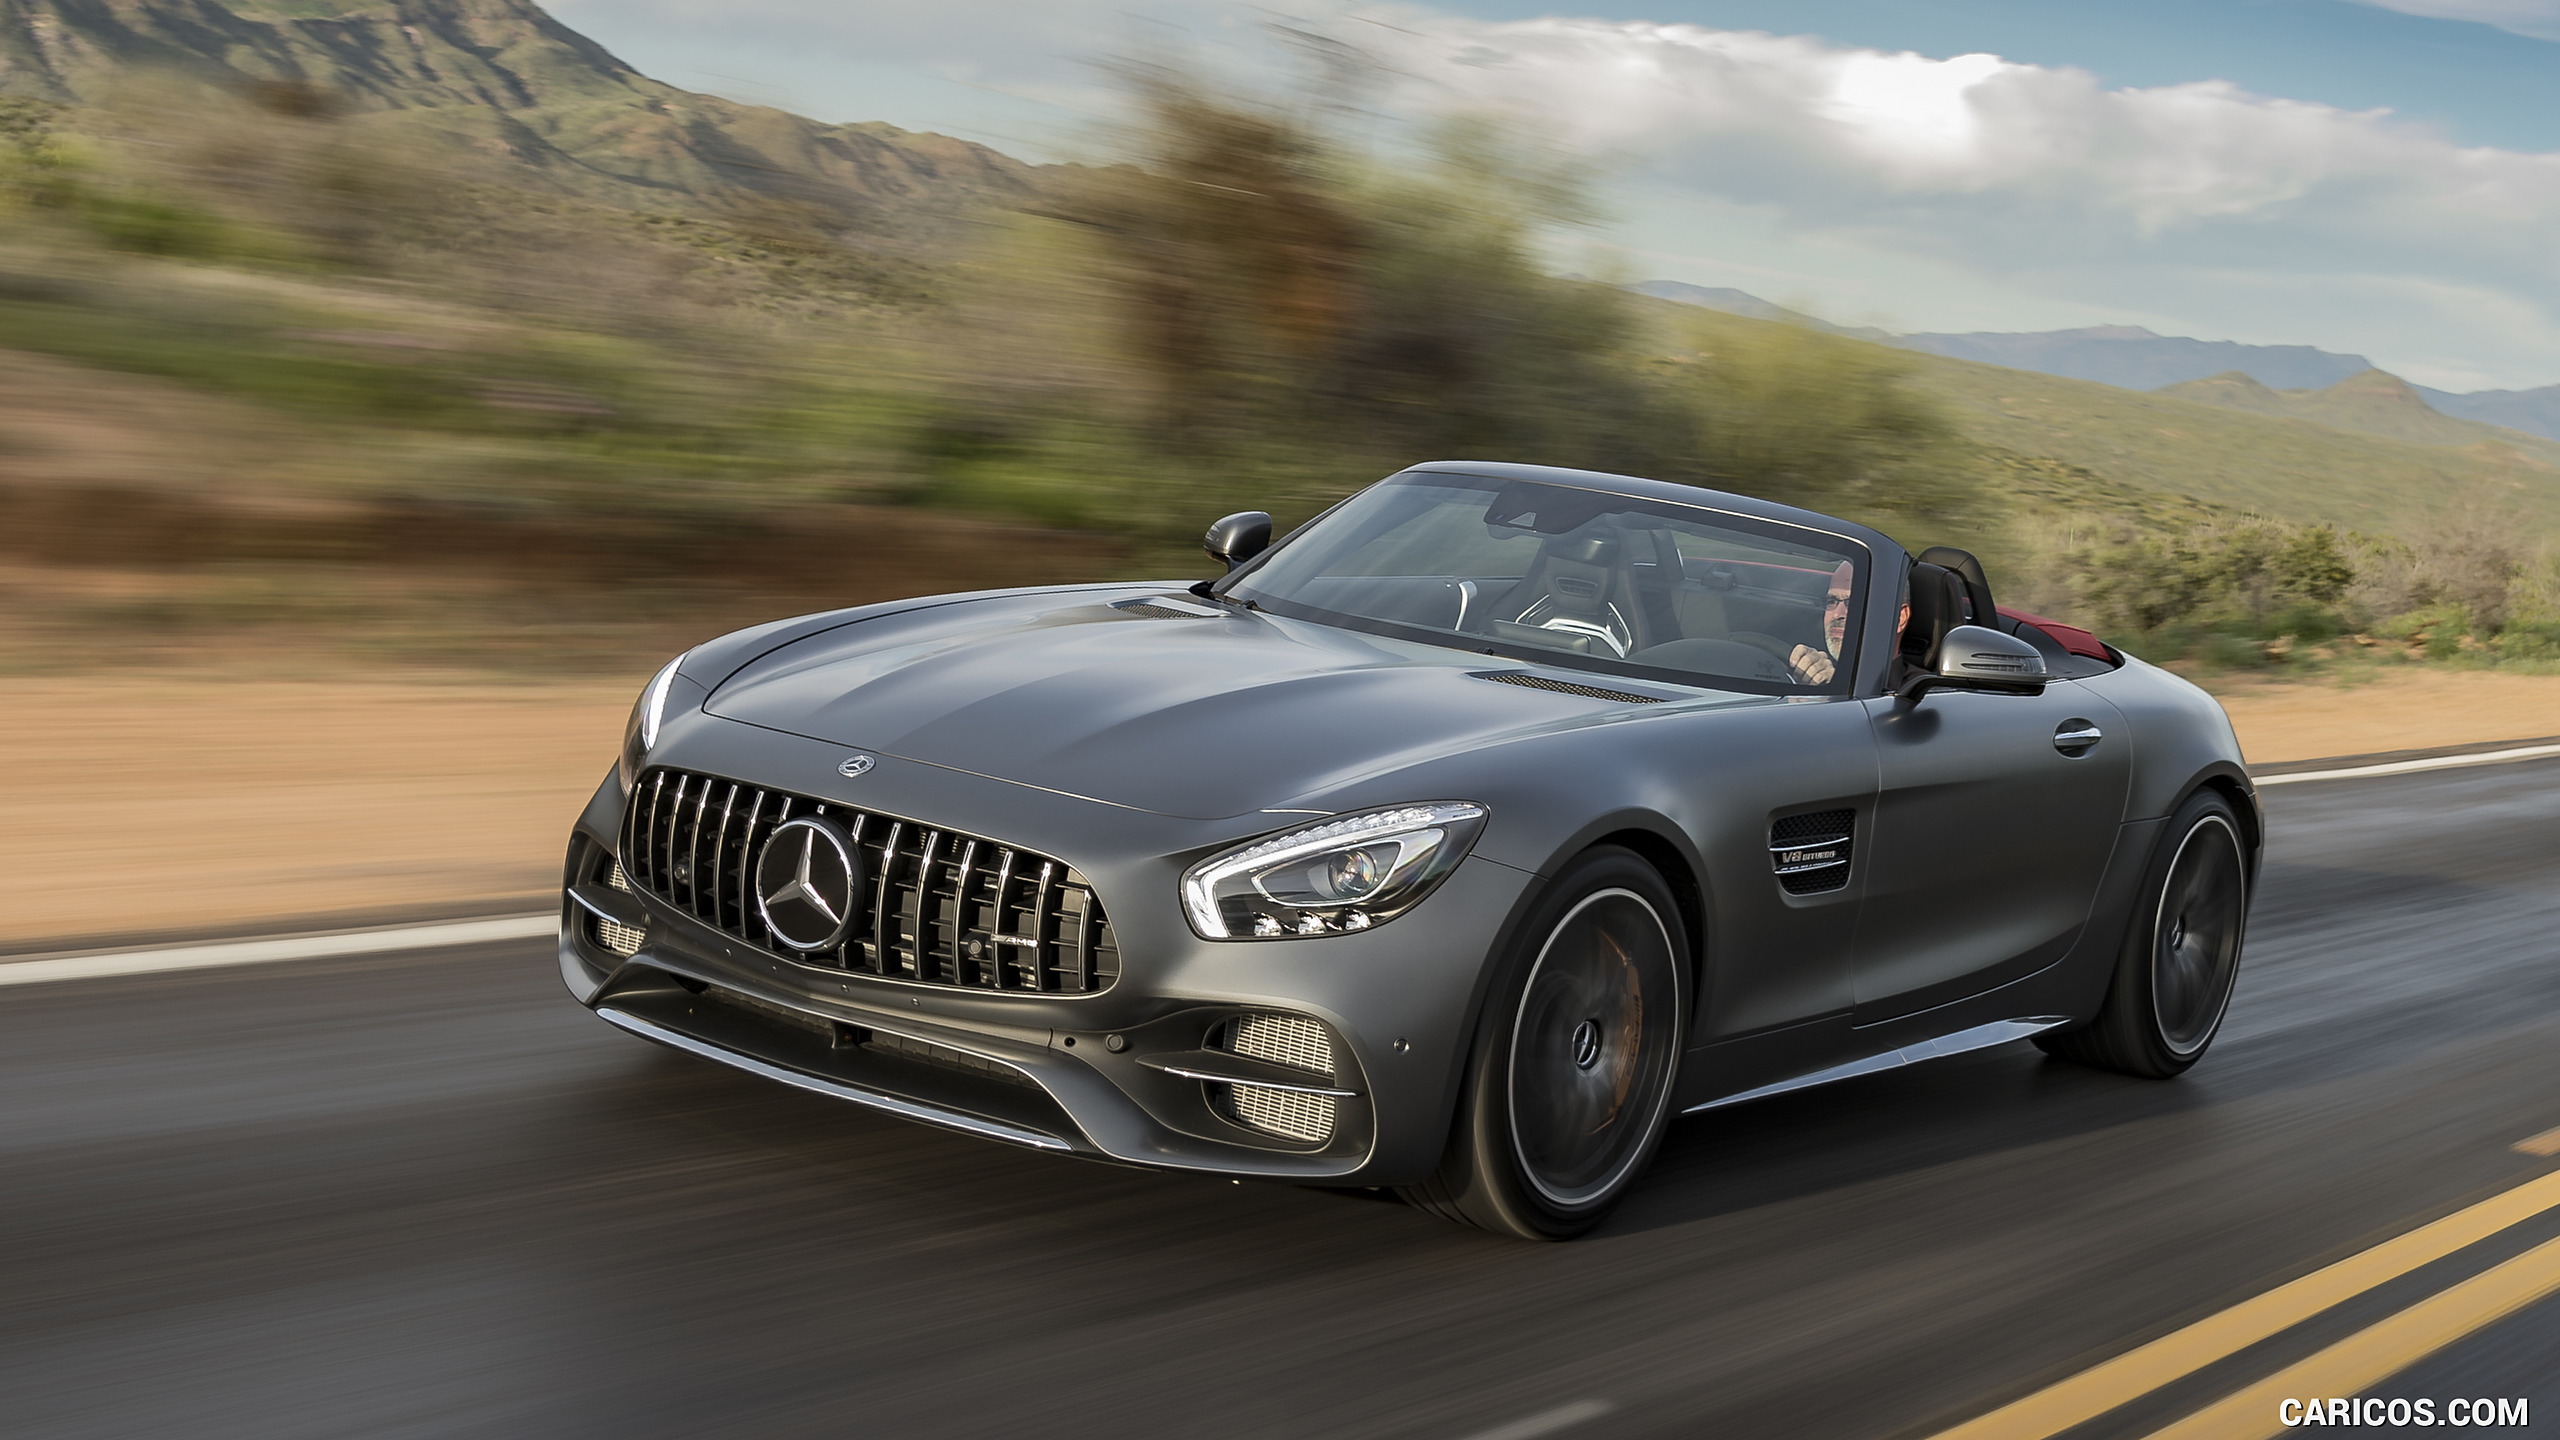 2018 Mercedes-AMG GT C Roadster - Front Three-Quarter, #292 of 350